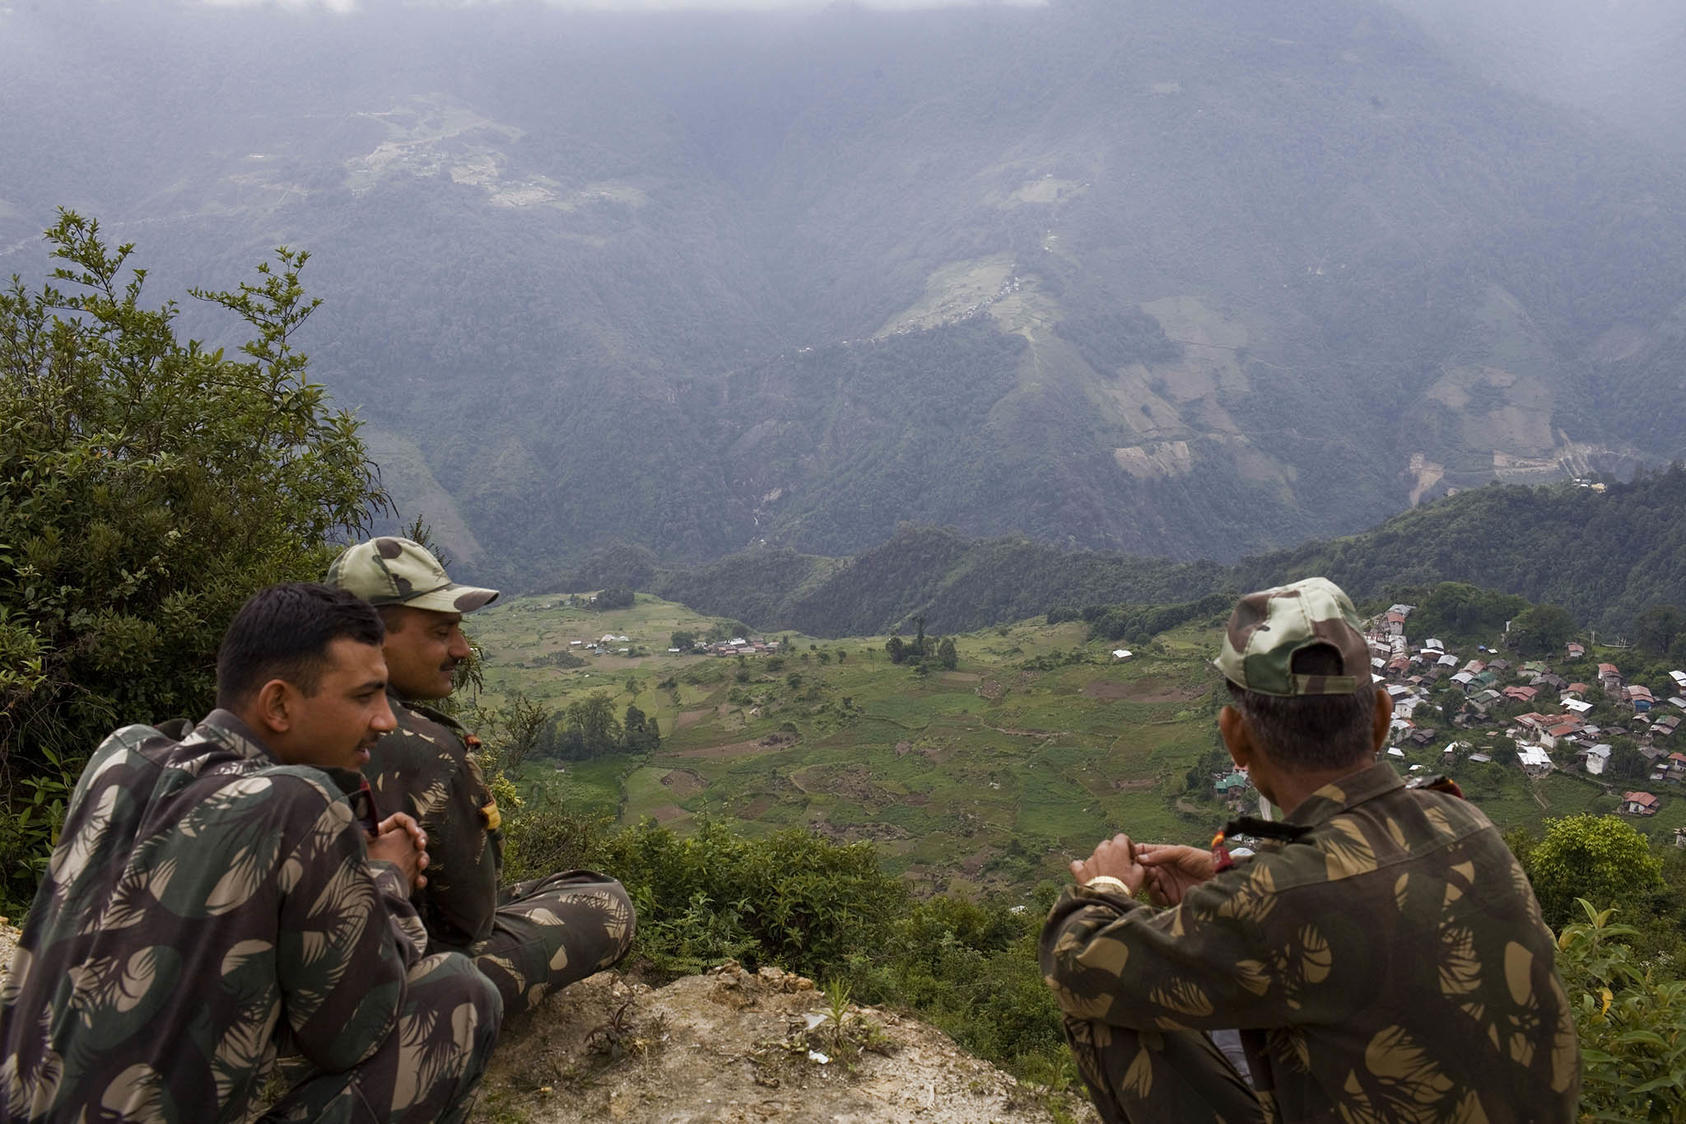 Indian soldiers are seen in Tawang Valley, Arunachal Pradesh, India, June 12, 2009. A December 2022 clash in this border region highlights the dangers of the intensifying Sino-Indian rivalry. (Shiho Fukada/The New York Times)